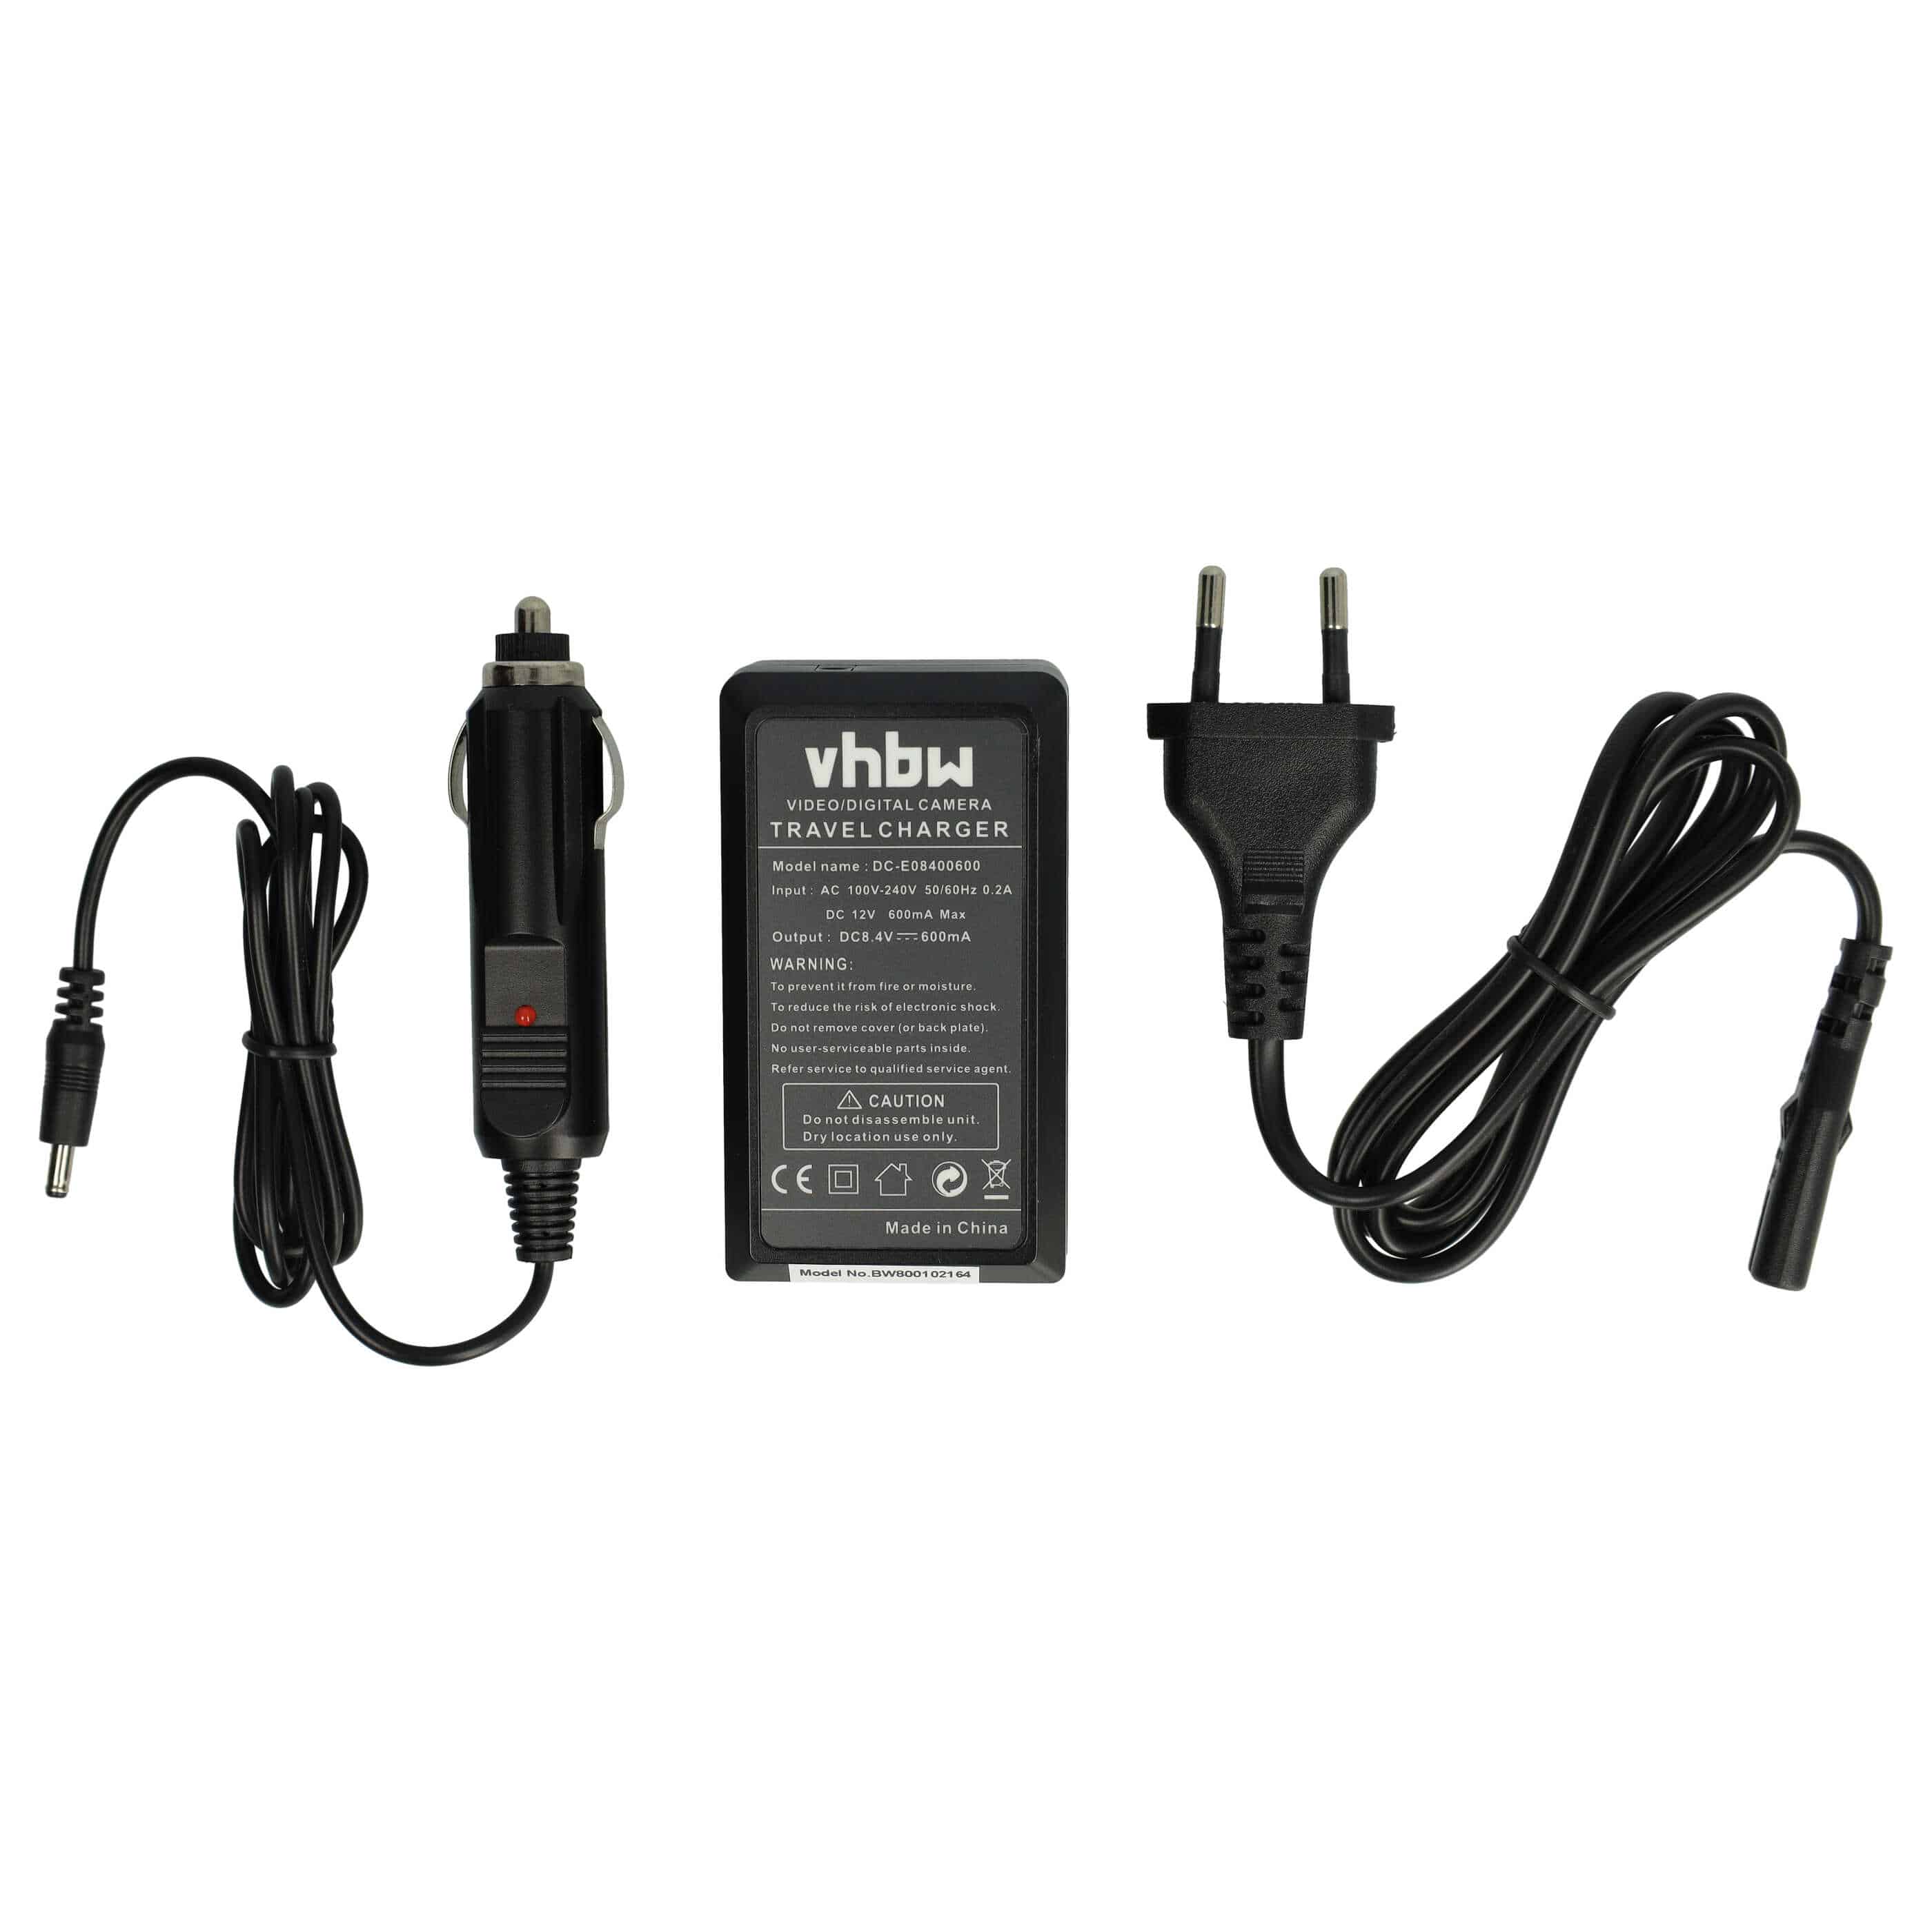 Battery Charger suitable for V-Lux DMC-FZ100 Camera etc. - 0.6 A, 8.4 V